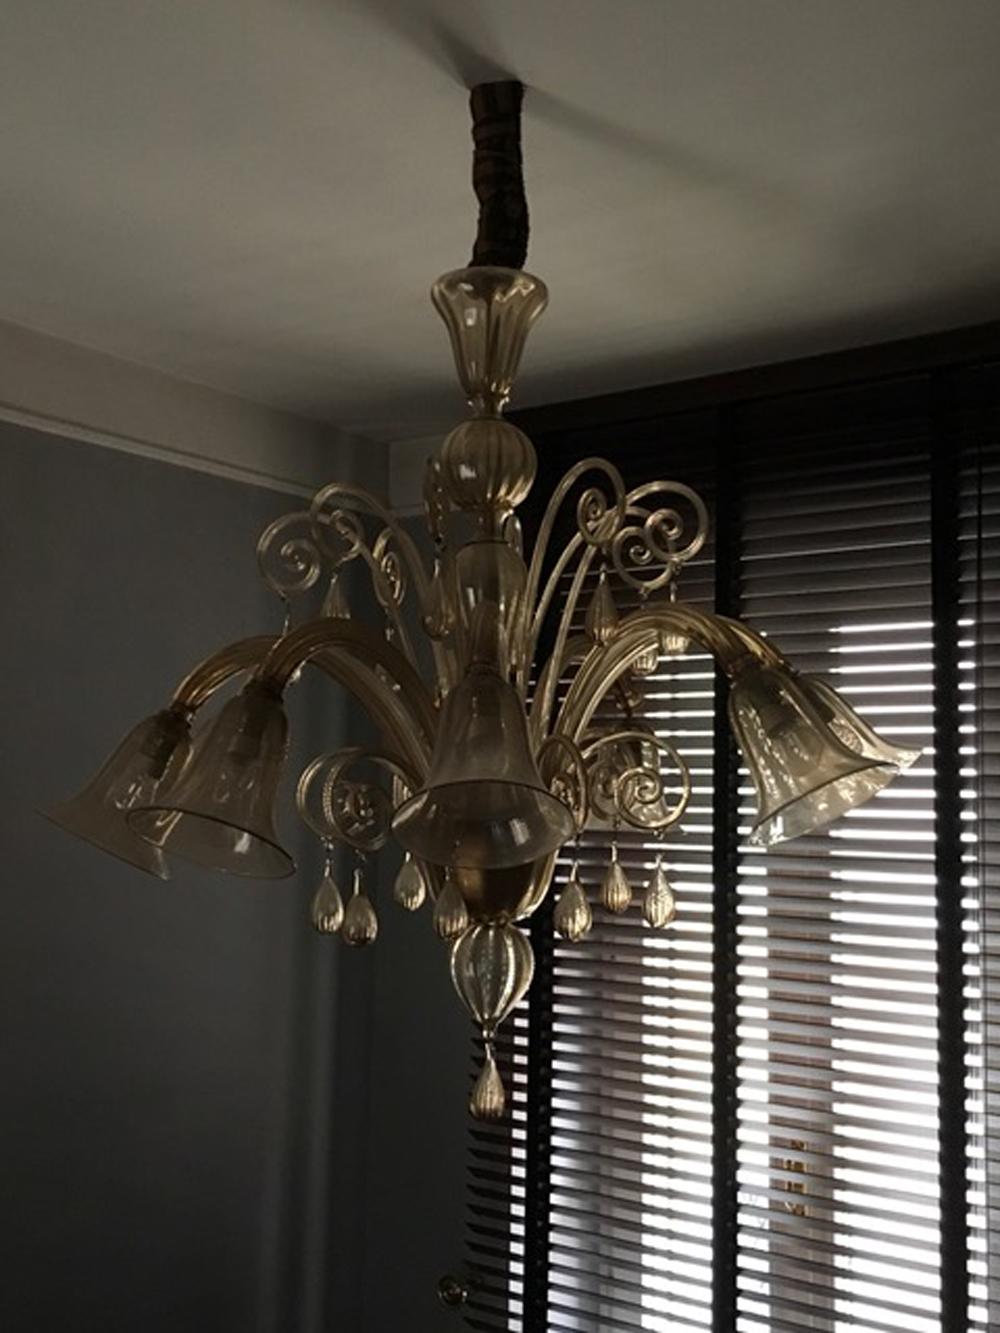 This elegant  blown Murano glass chandelier has 8 arms, 8 lights and 8 decorative arms.
The bulbholder has a delicate flower form and the color is a fine light gold.
It is a piece of timeless beauty and a contemporary presence in the room.

With